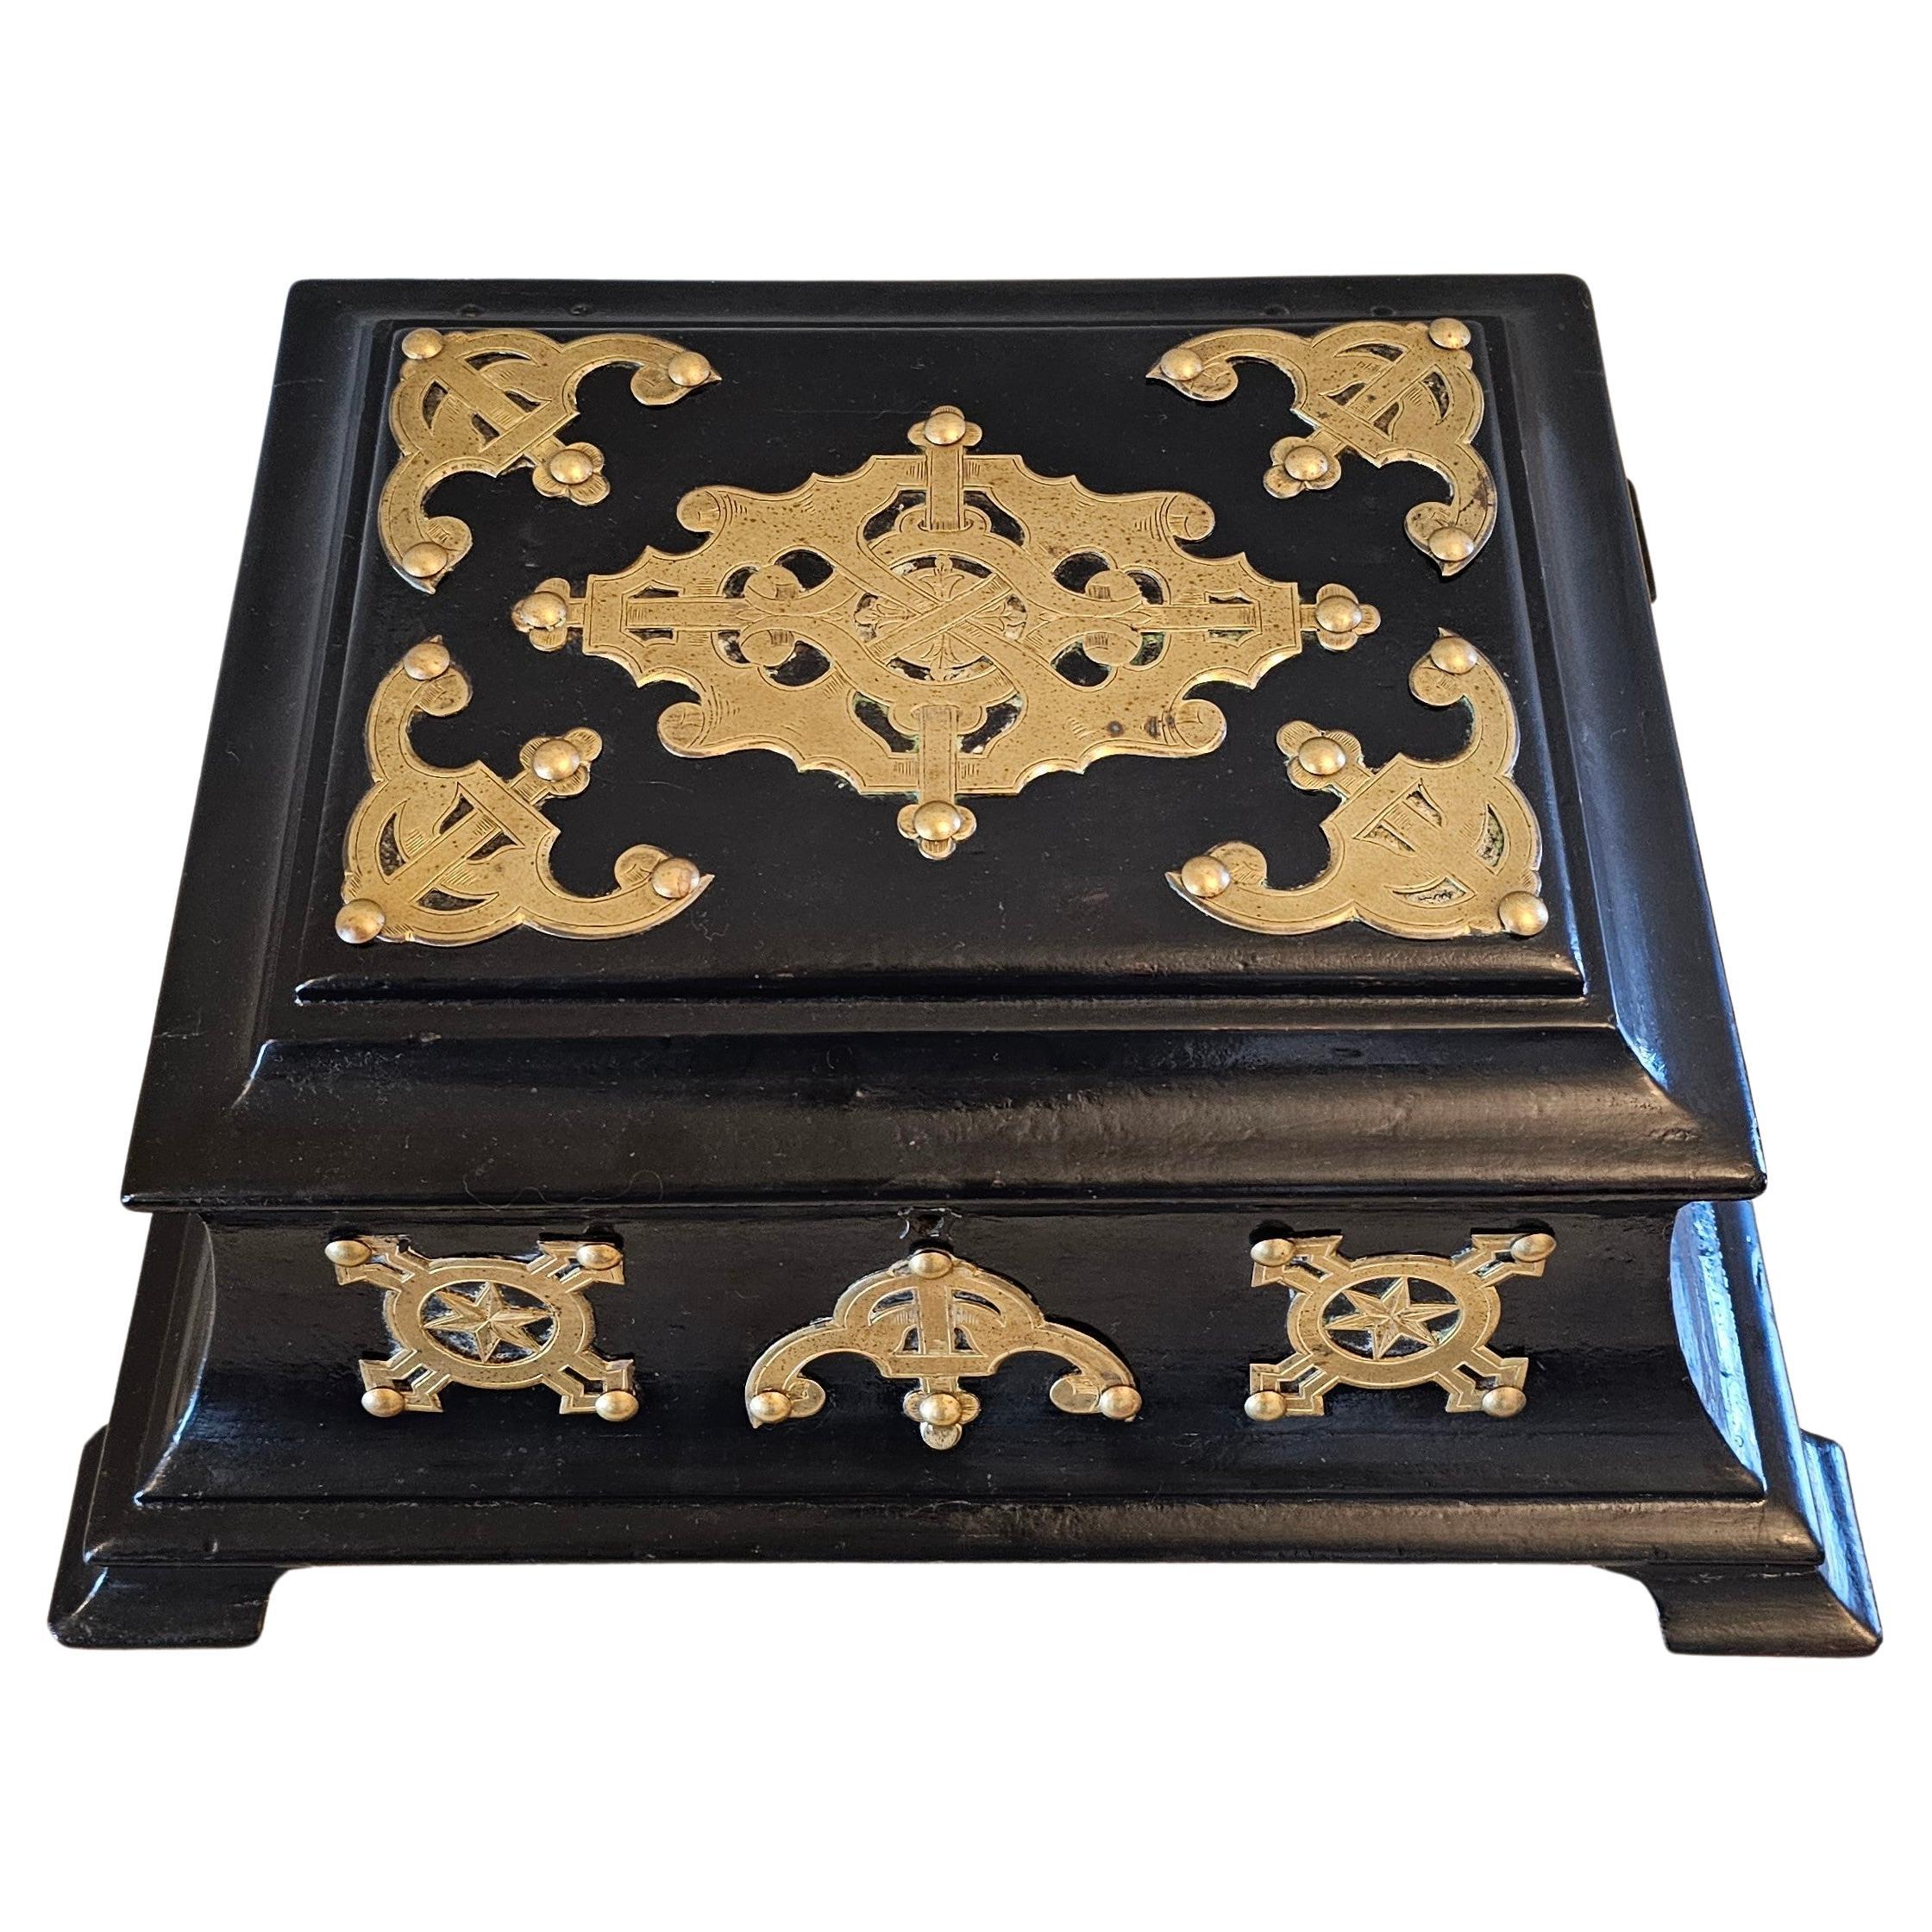 A large antique English Victorian era brass-mounted papier-mache dressing box.

19th century, England, large shaped casket form, exterior in a black lacquered finish embellished with ornate riveted and incised brass mounts. The hinged-lid top